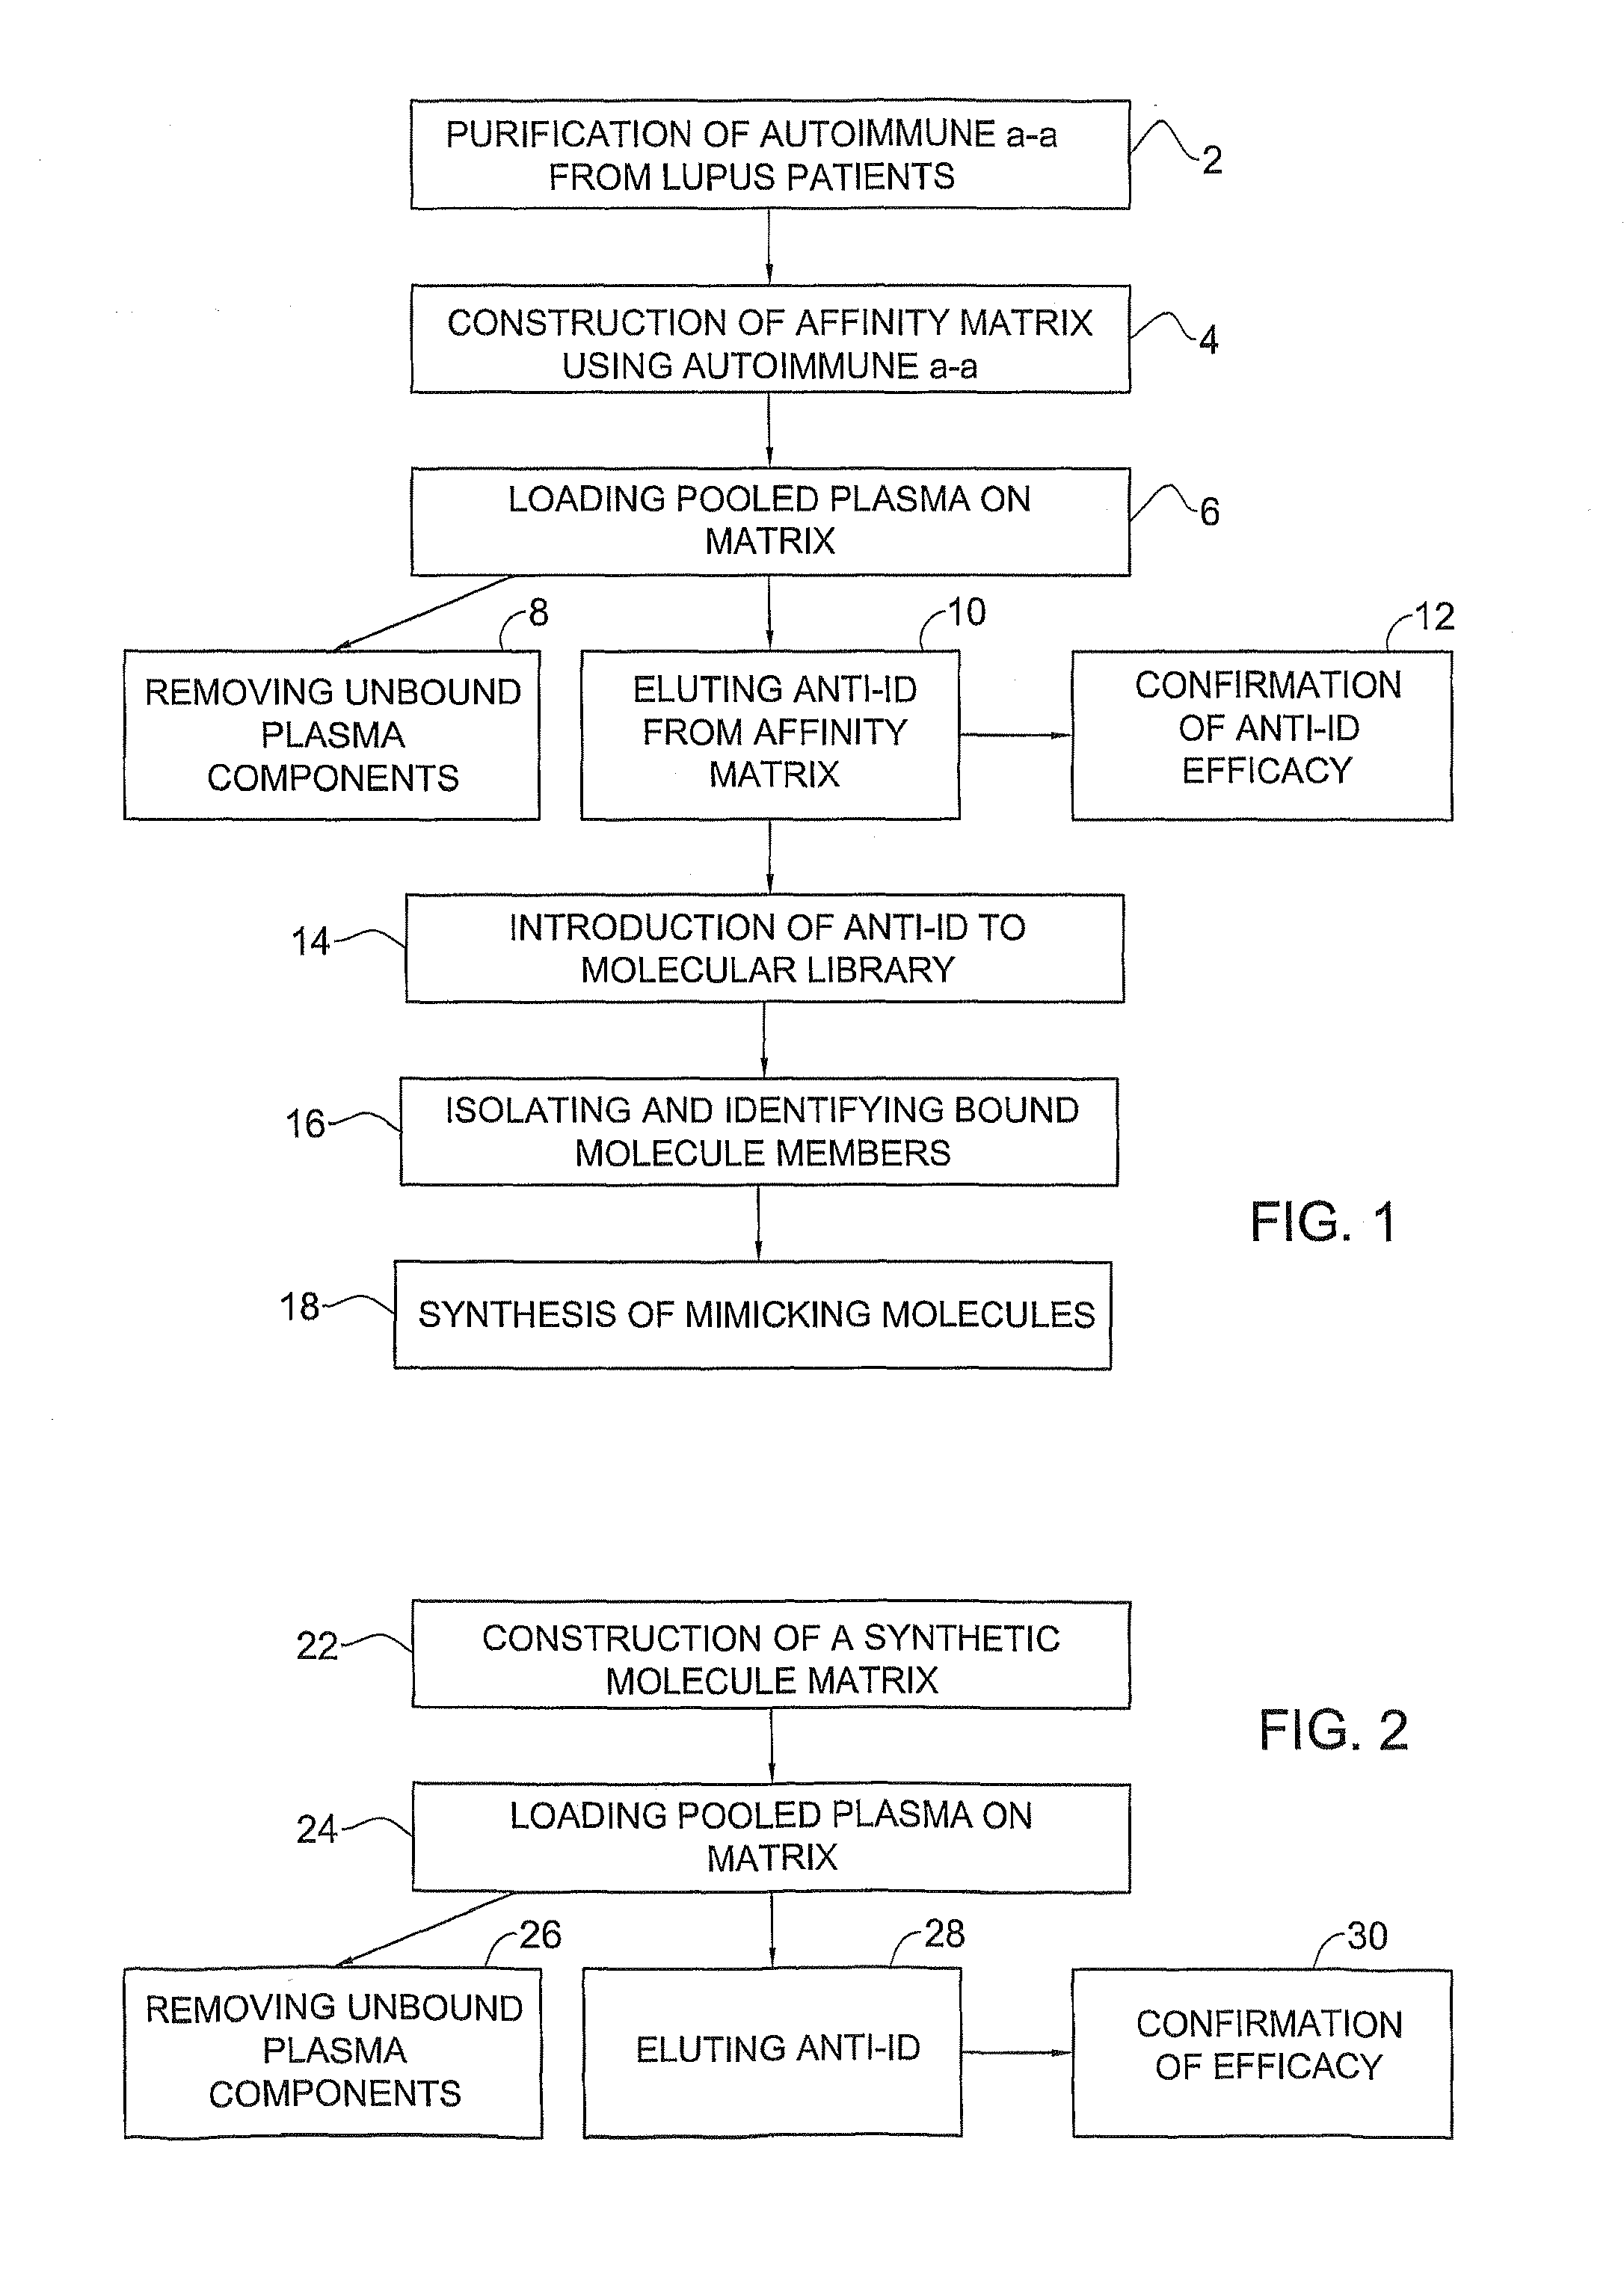 Molecules mimicking an autoantibody idiotype and compositions containing same